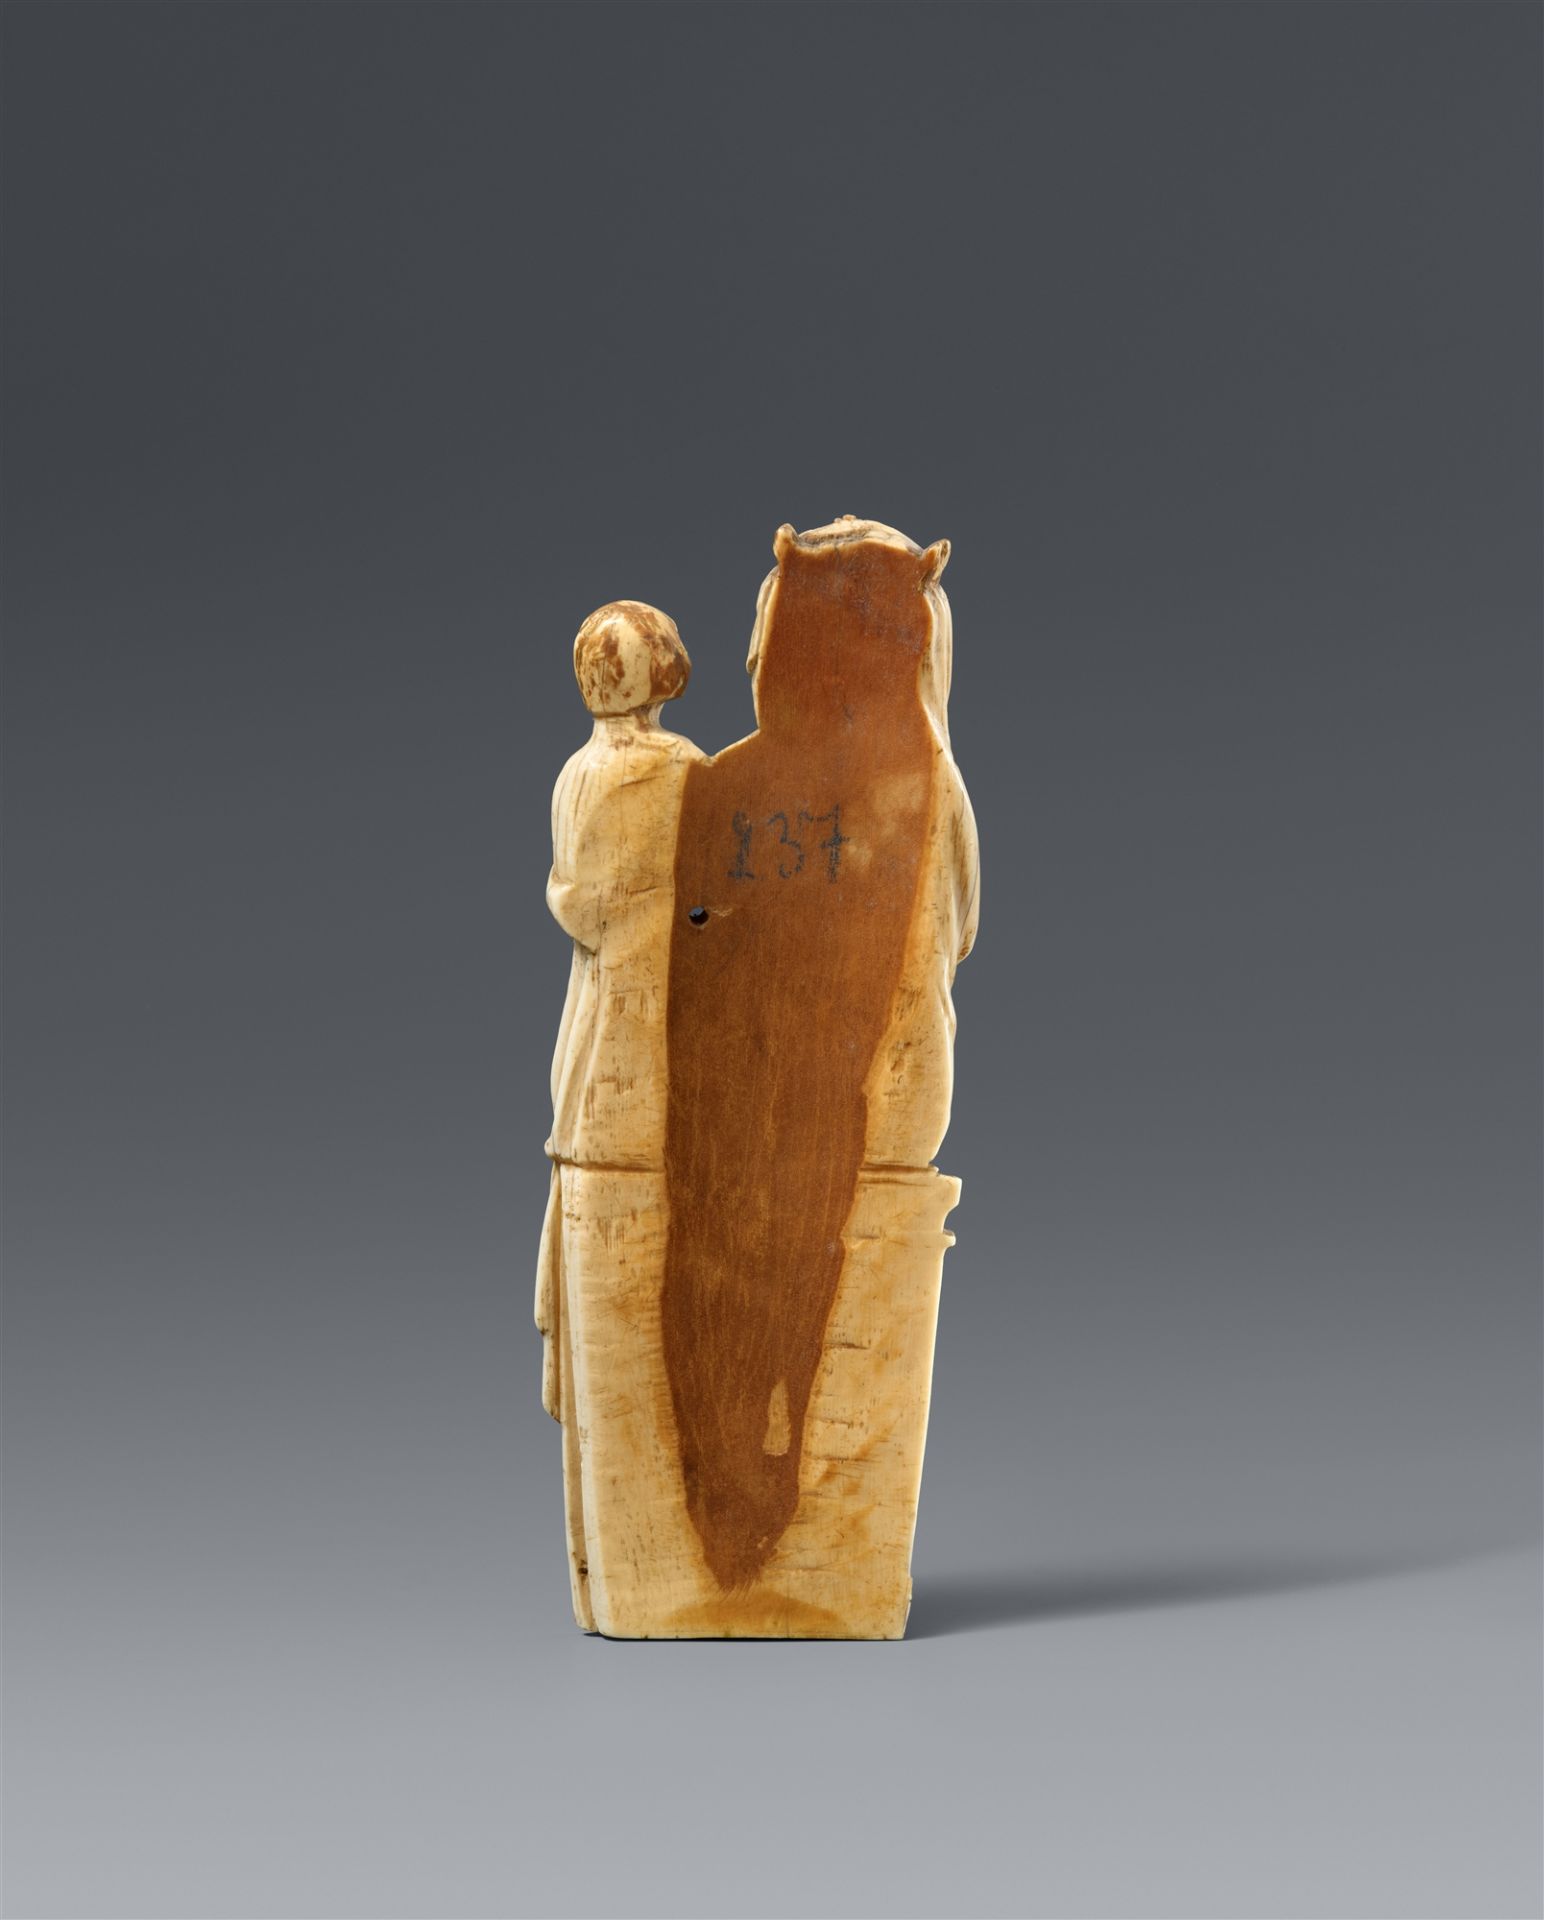 A French carved ivory figure of the Virgin enthroned, second half 14th century - Image 2 of 2